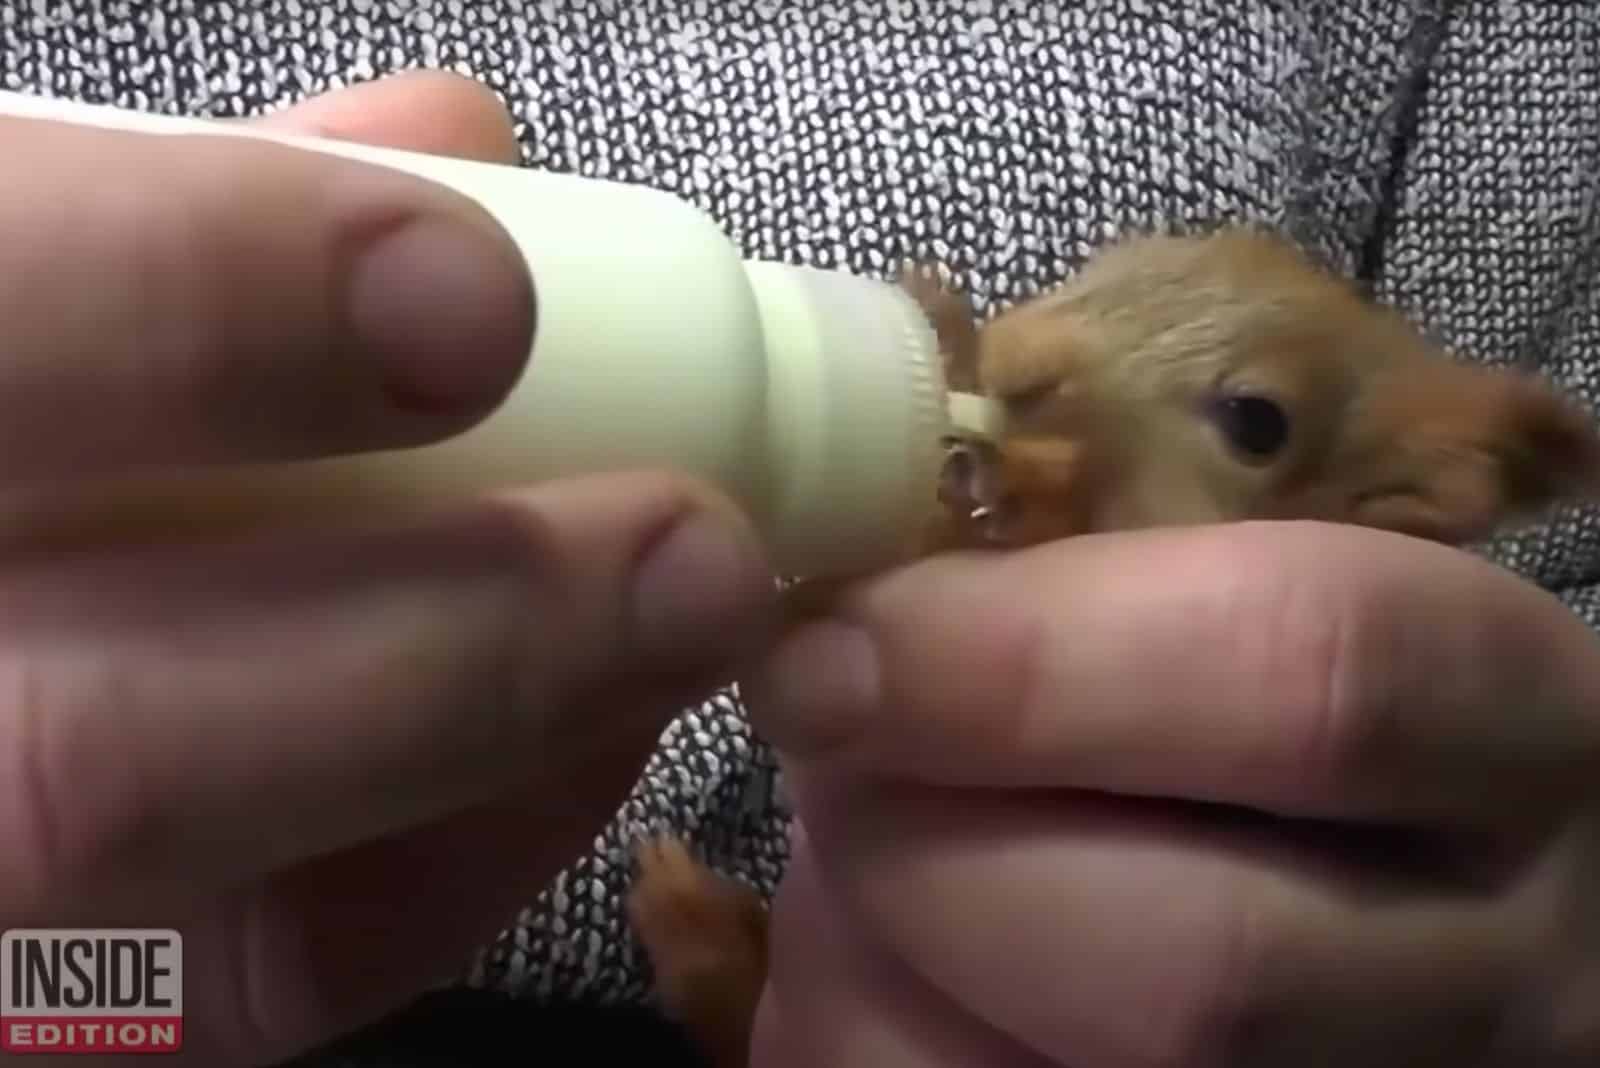 baby squirrel drinks from a bottle